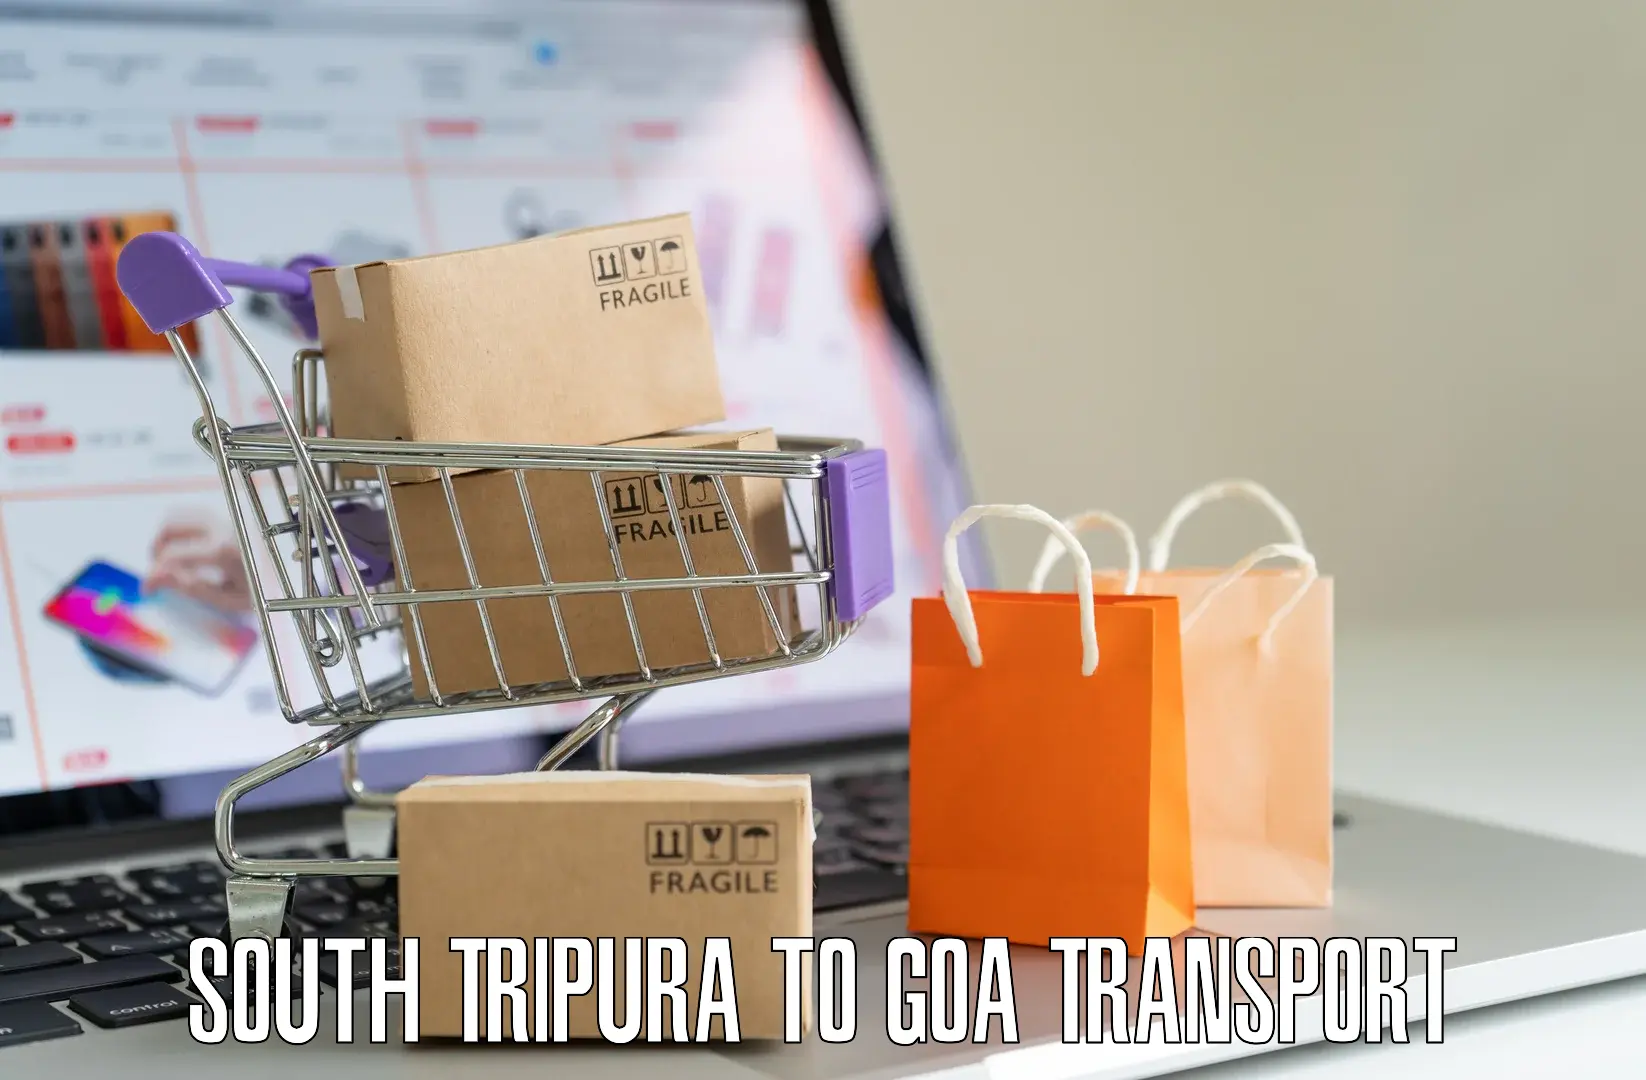 Express transport services in South Tripura to Goa University